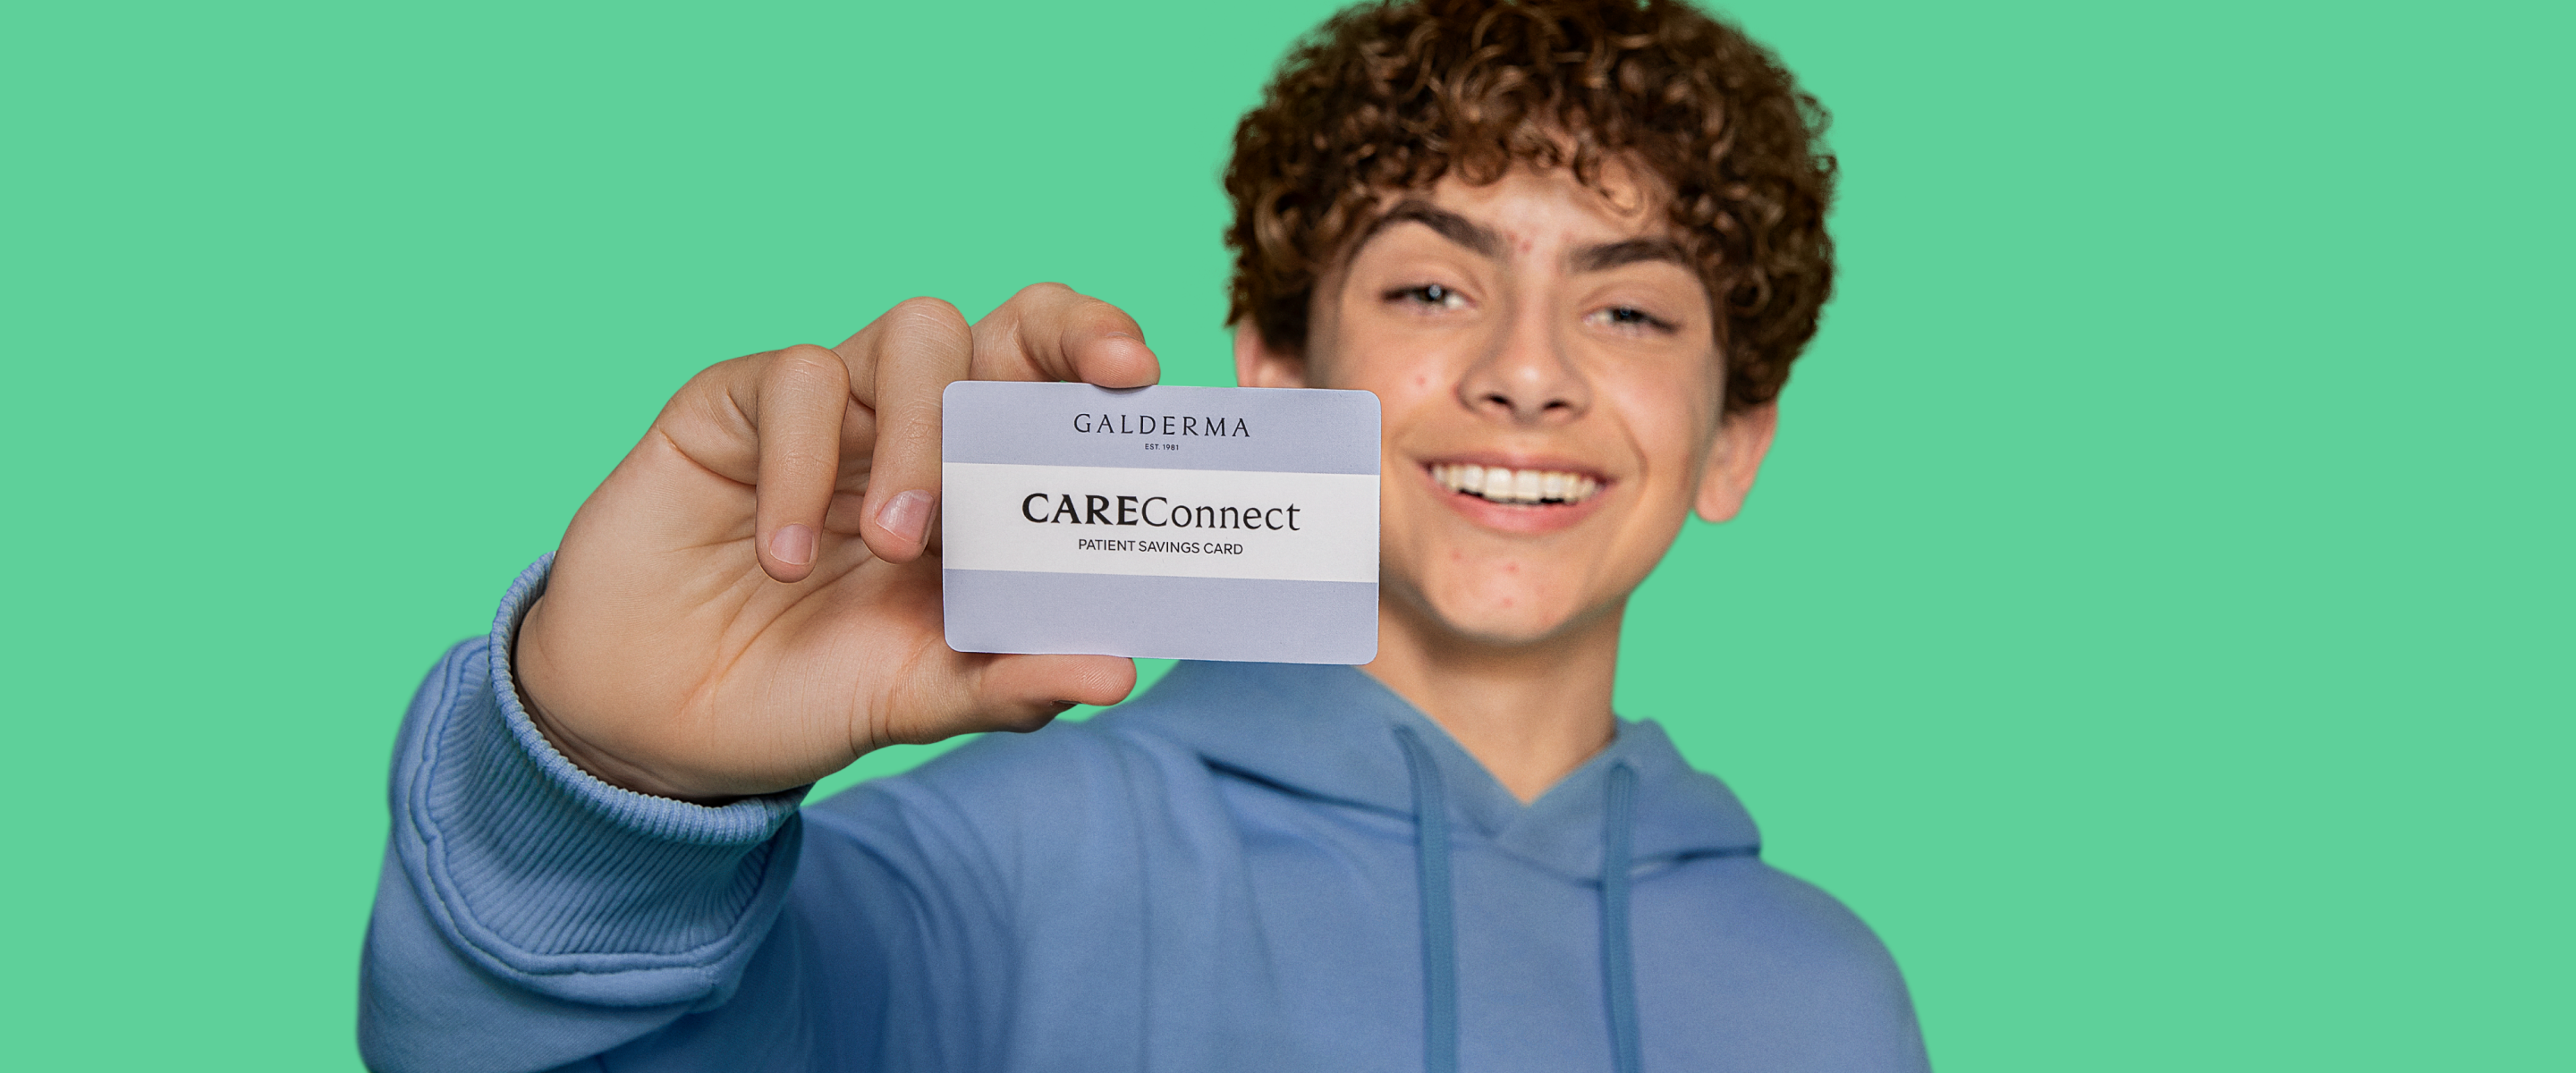 Young male teen holding the Galderma CareConnect card up in front of his face toward the camera.